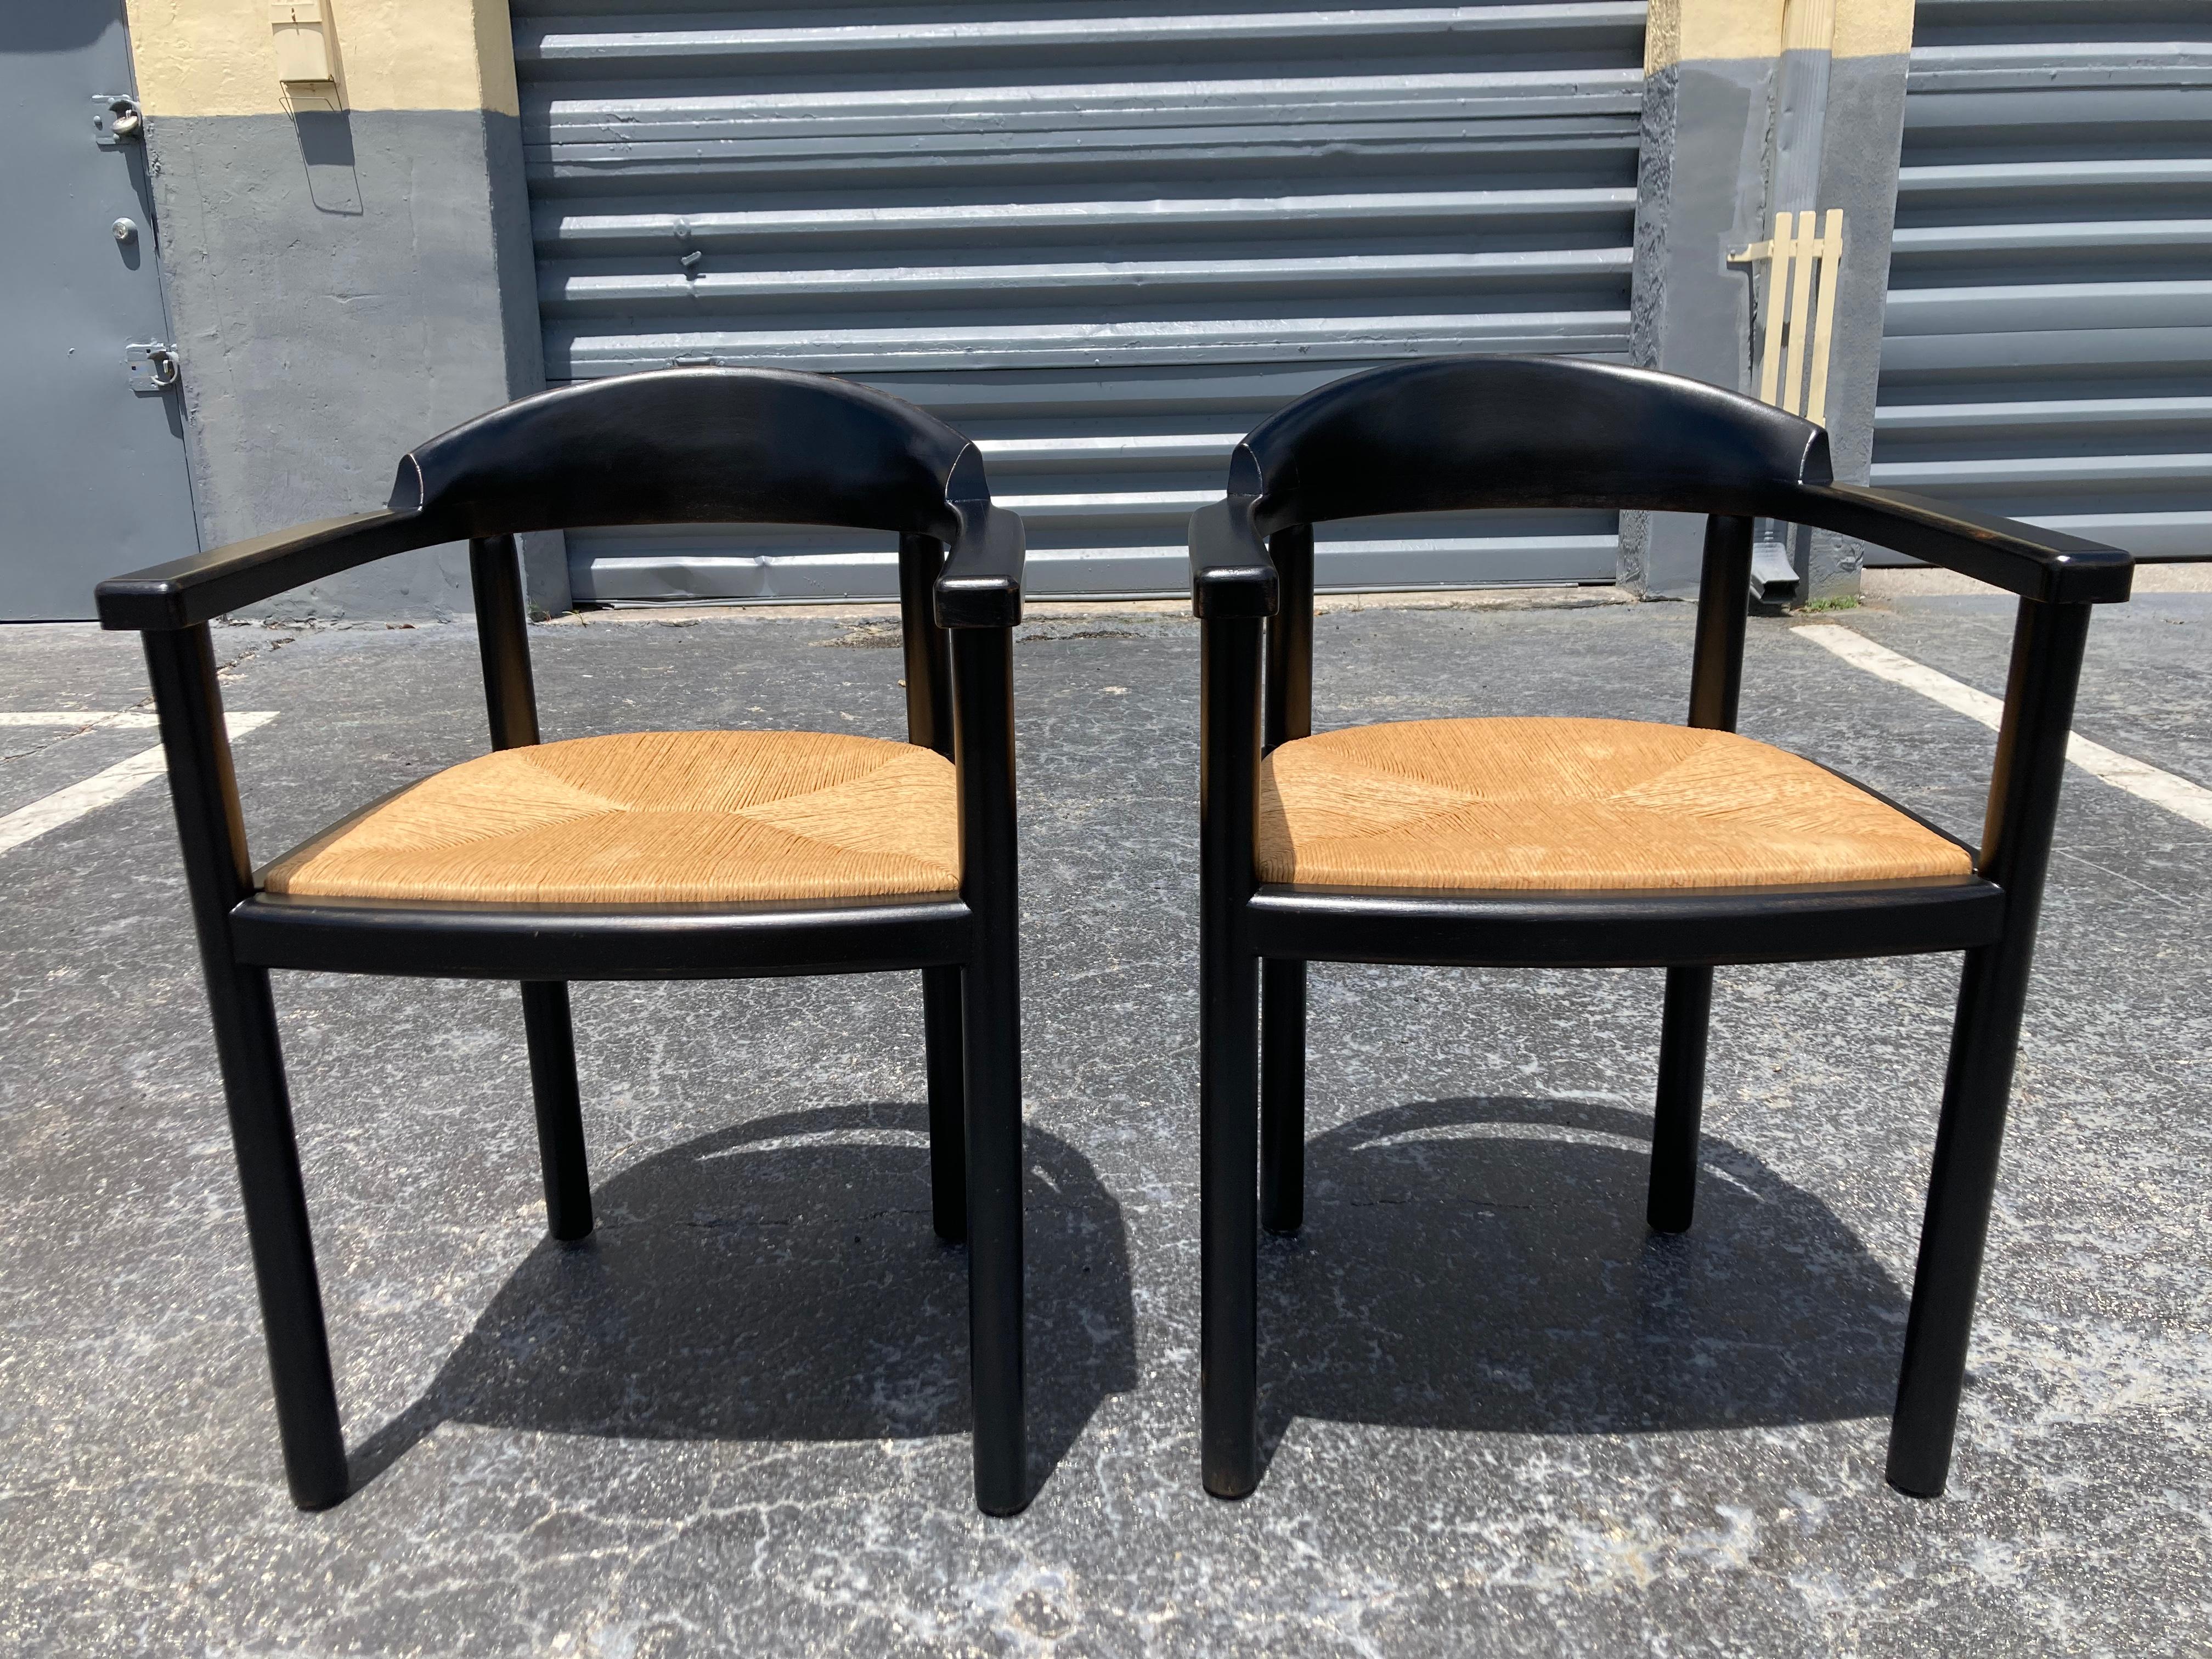 Pair of Ebonized Wood Arm Chairs with Rush Seats from the 1960s. 
 Sturdy and ready for new home.